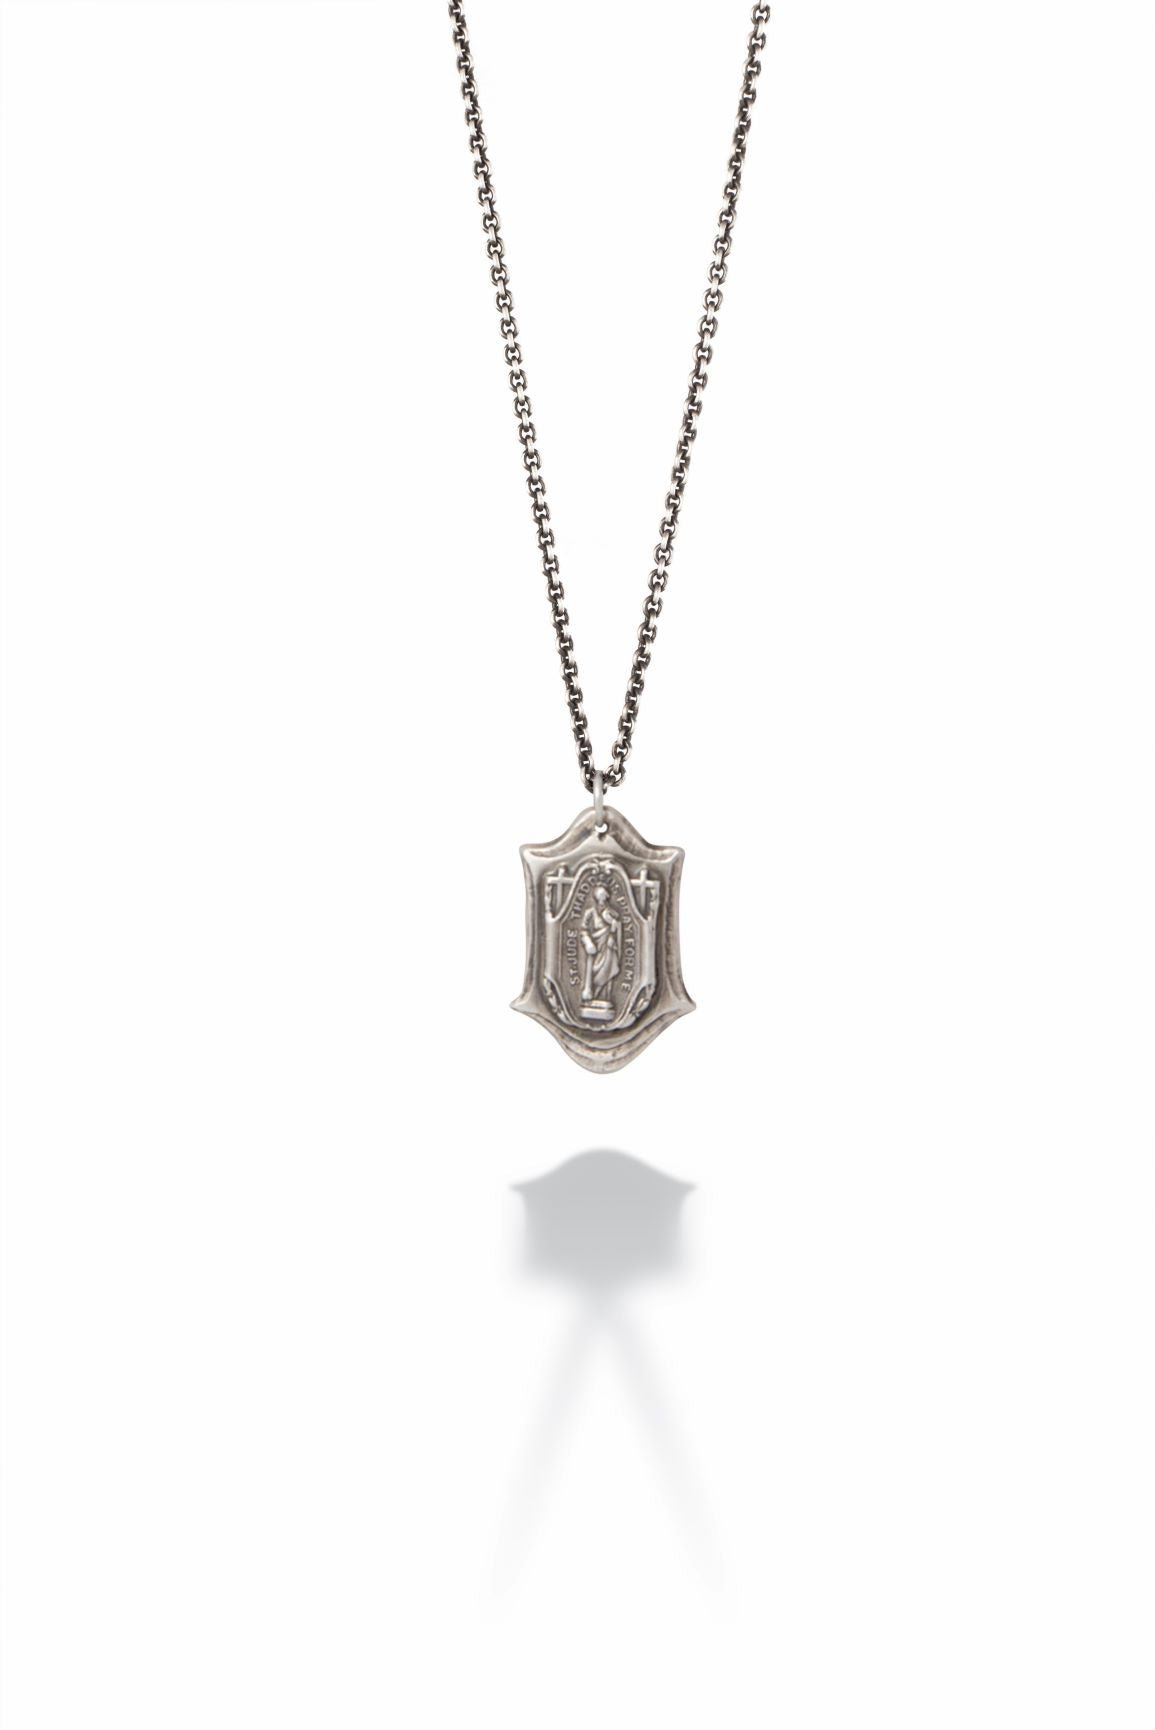 St. Jude Necklace | Brother Wolf | Saint Medals & Religious Jewelry ...